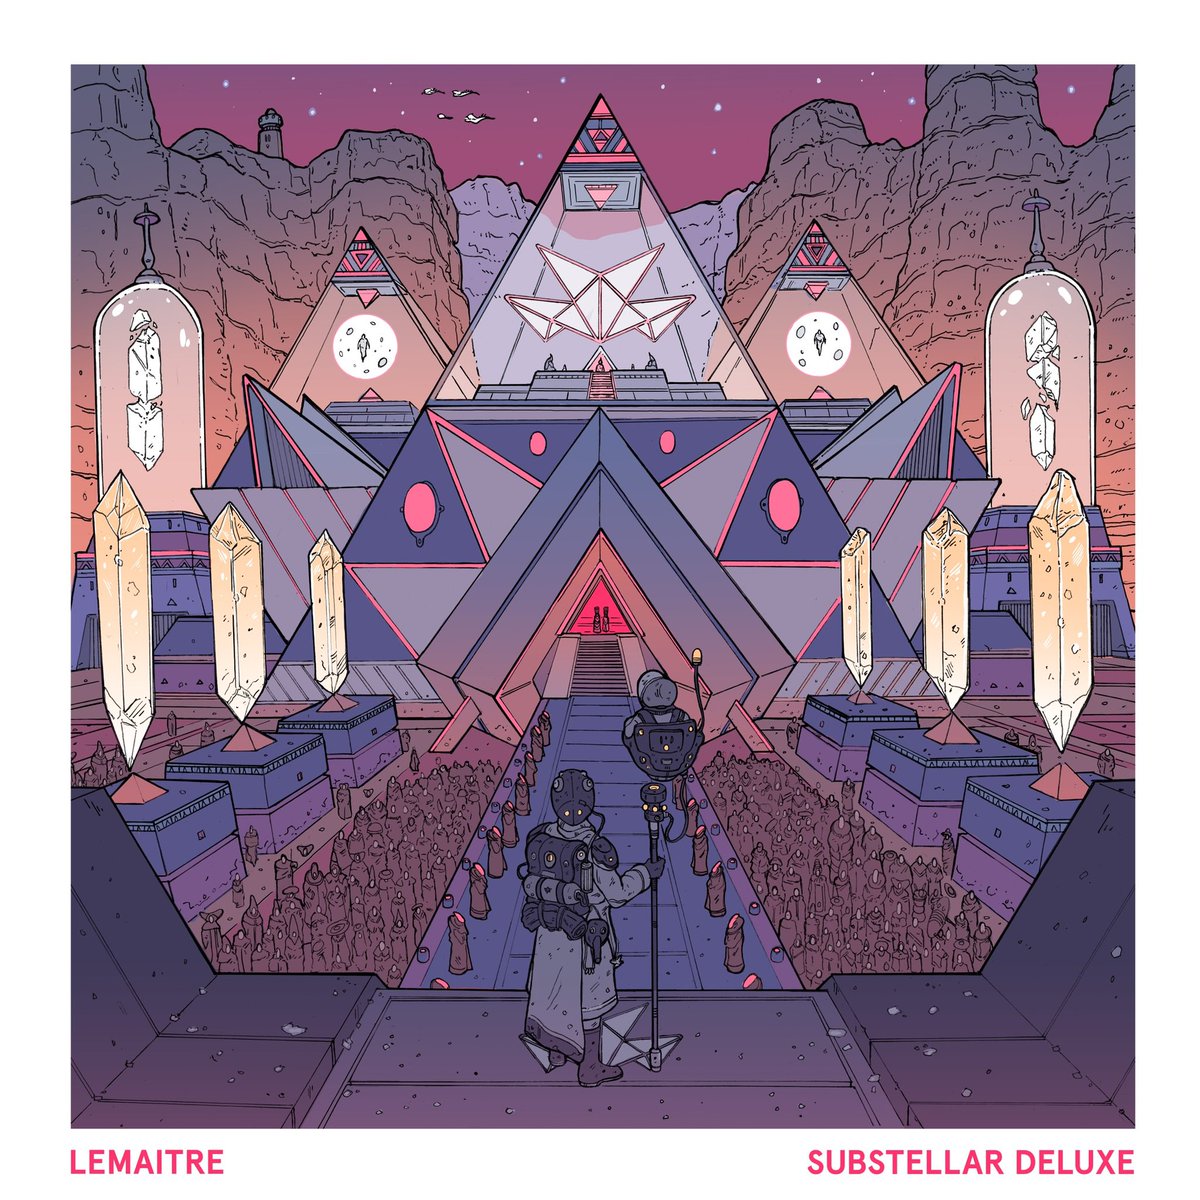 Releasing the Substellar Deluxe album this Friday! 3 new songs and 3 remixes🚨 pre save it here linktr.ee/lemaitre